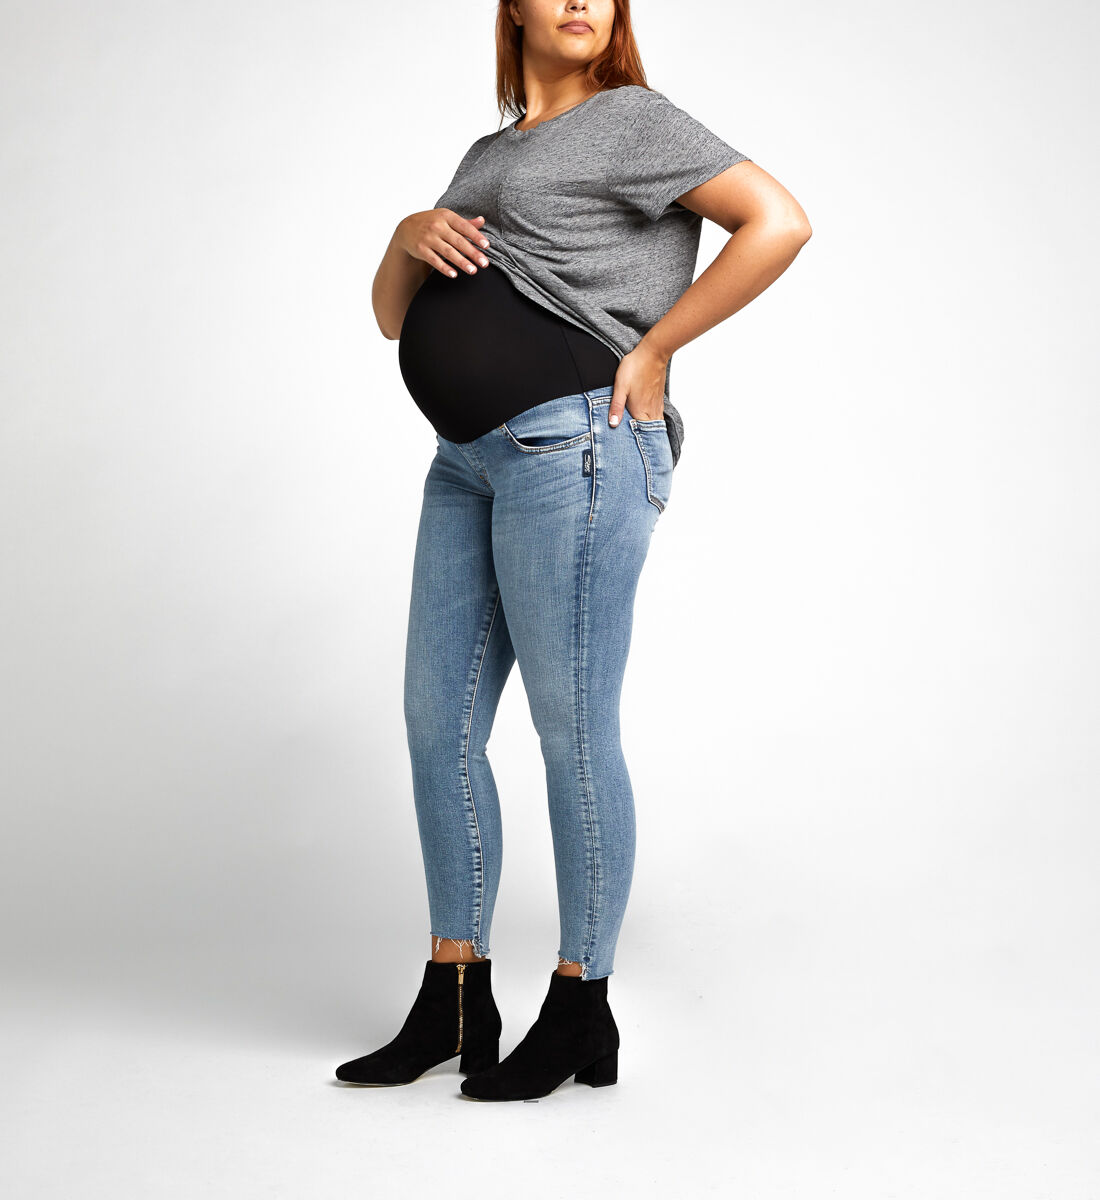 Aiko Ankle Skinny Maternity Jeans Alt Image 2